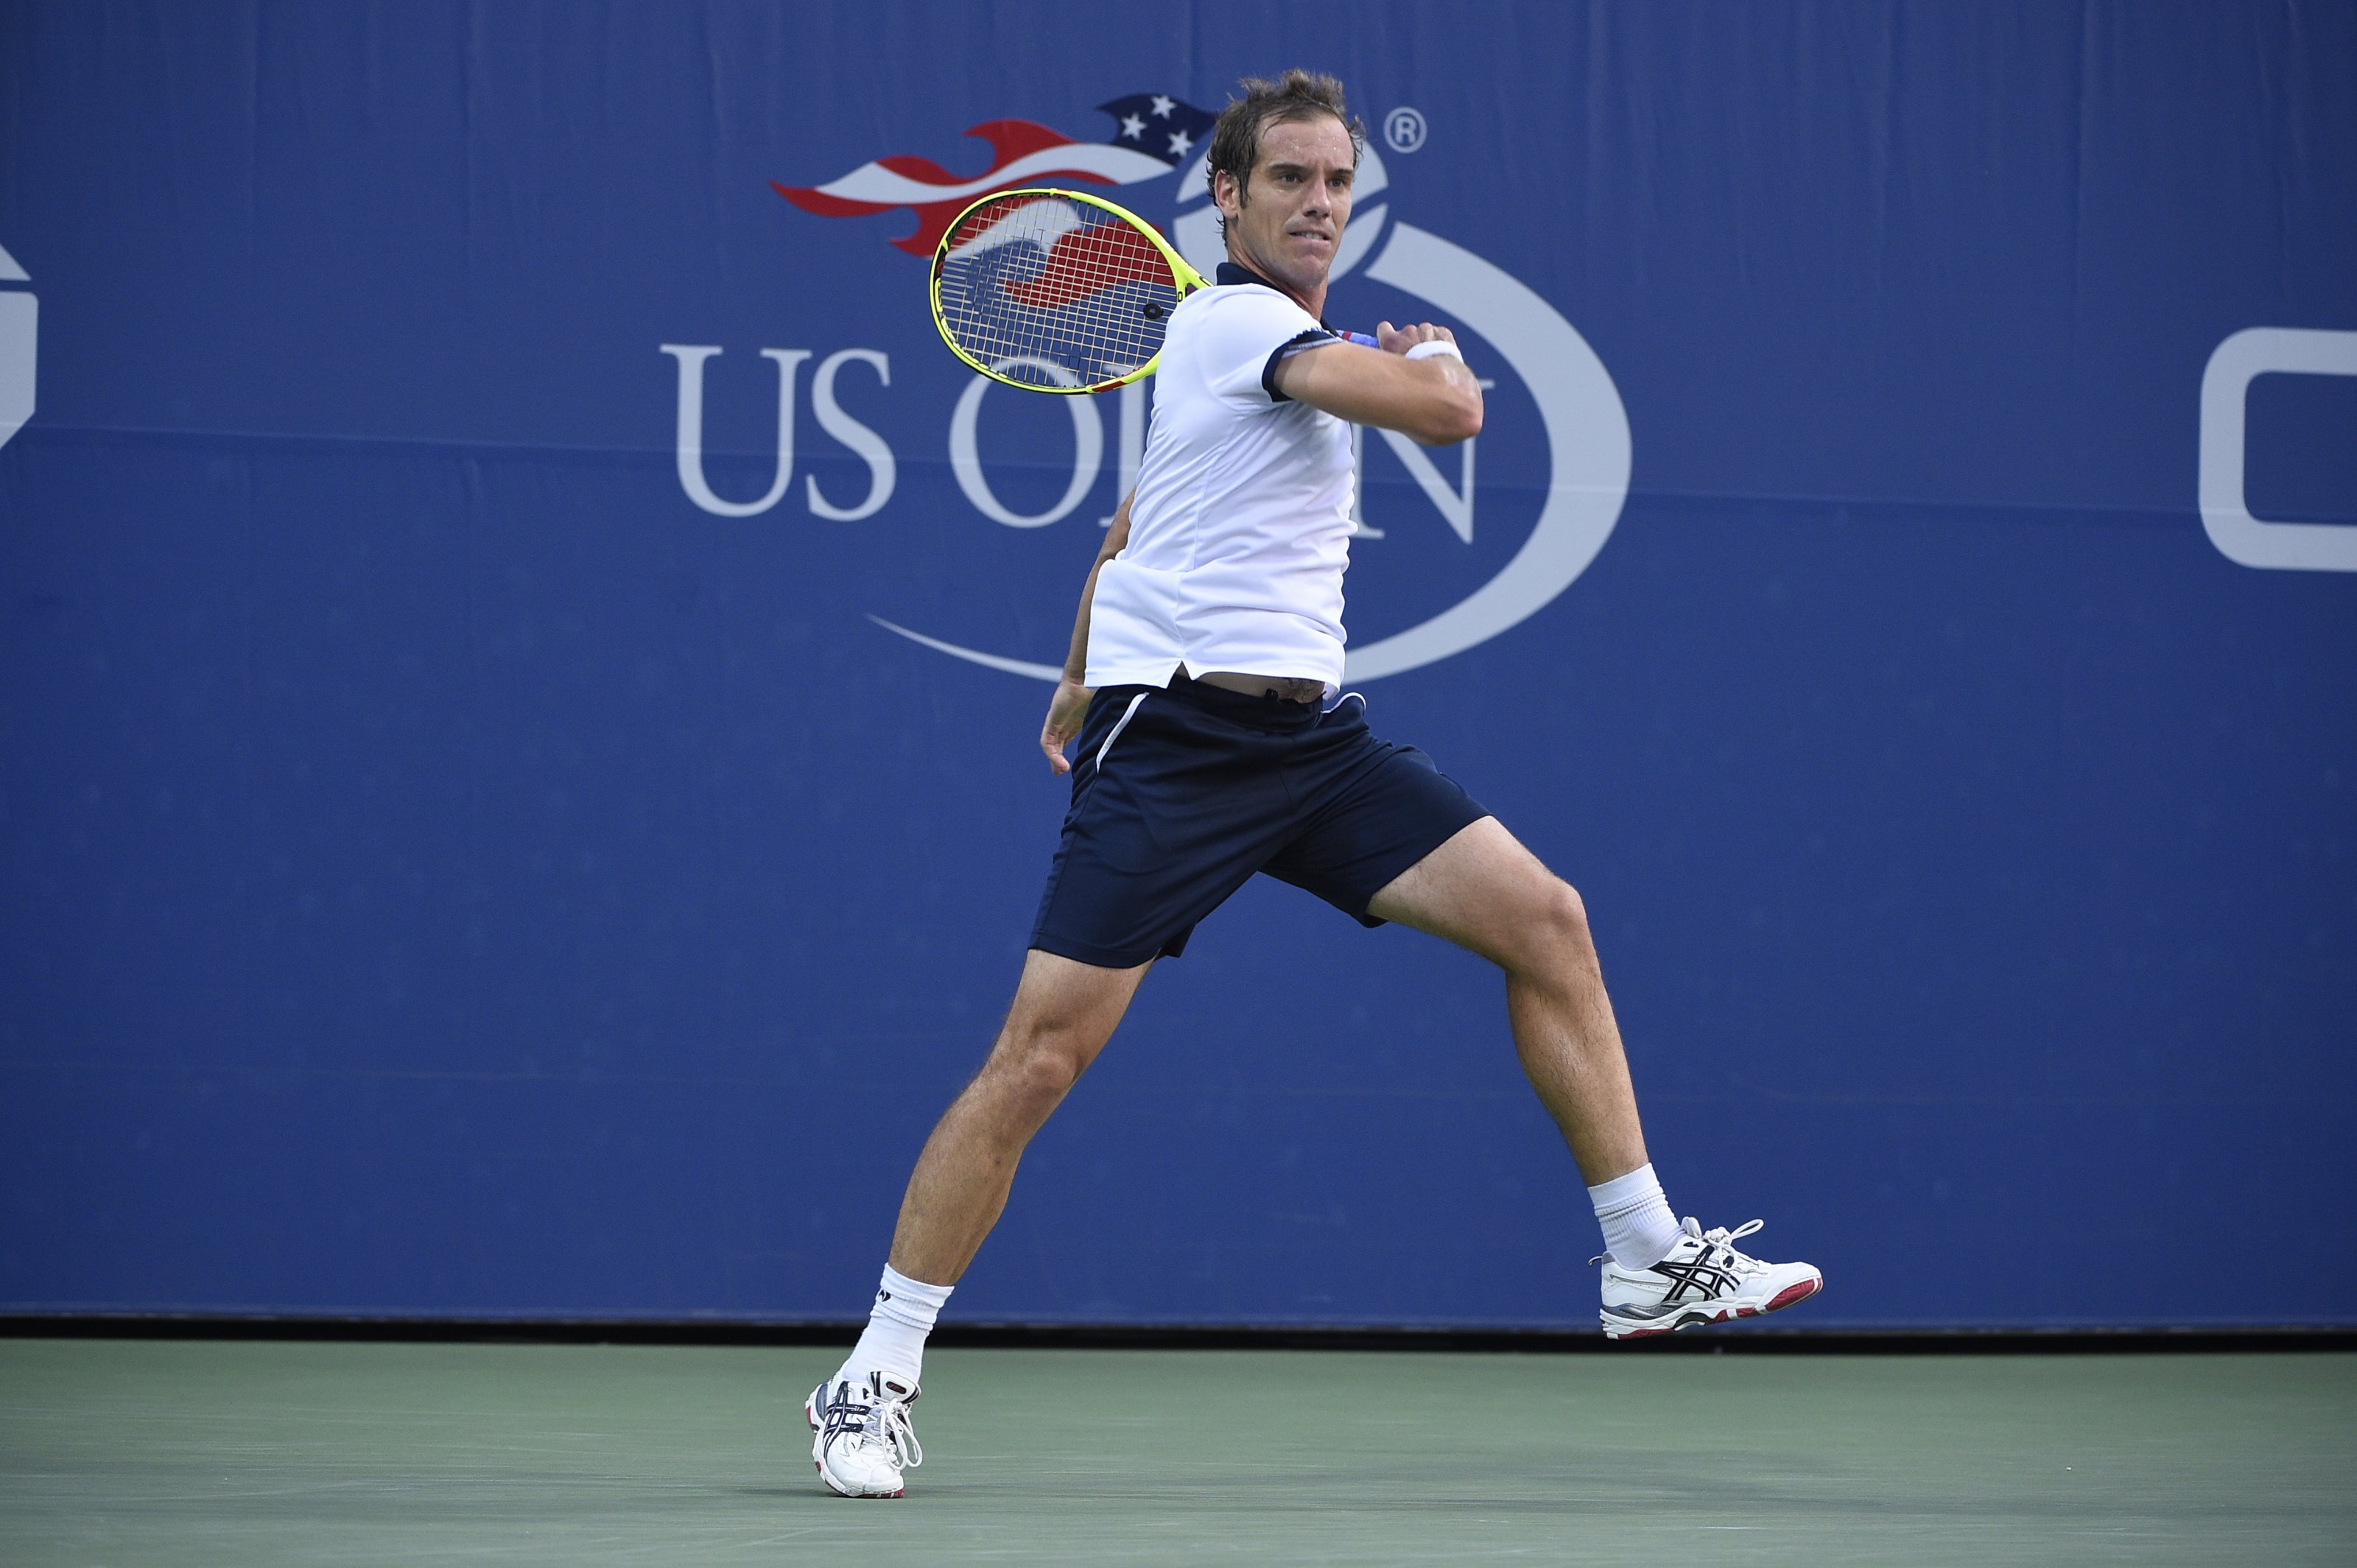 Richard Gasquet of France plays his second round match at the US Open at the USTA Billie Jean King National Tennis Center in the Flushing neighborhood of the Queens borough of New York City, NY, USA on September 3, 2015. Photo by Corinne Dubreuil/ABACAPRESS.COM